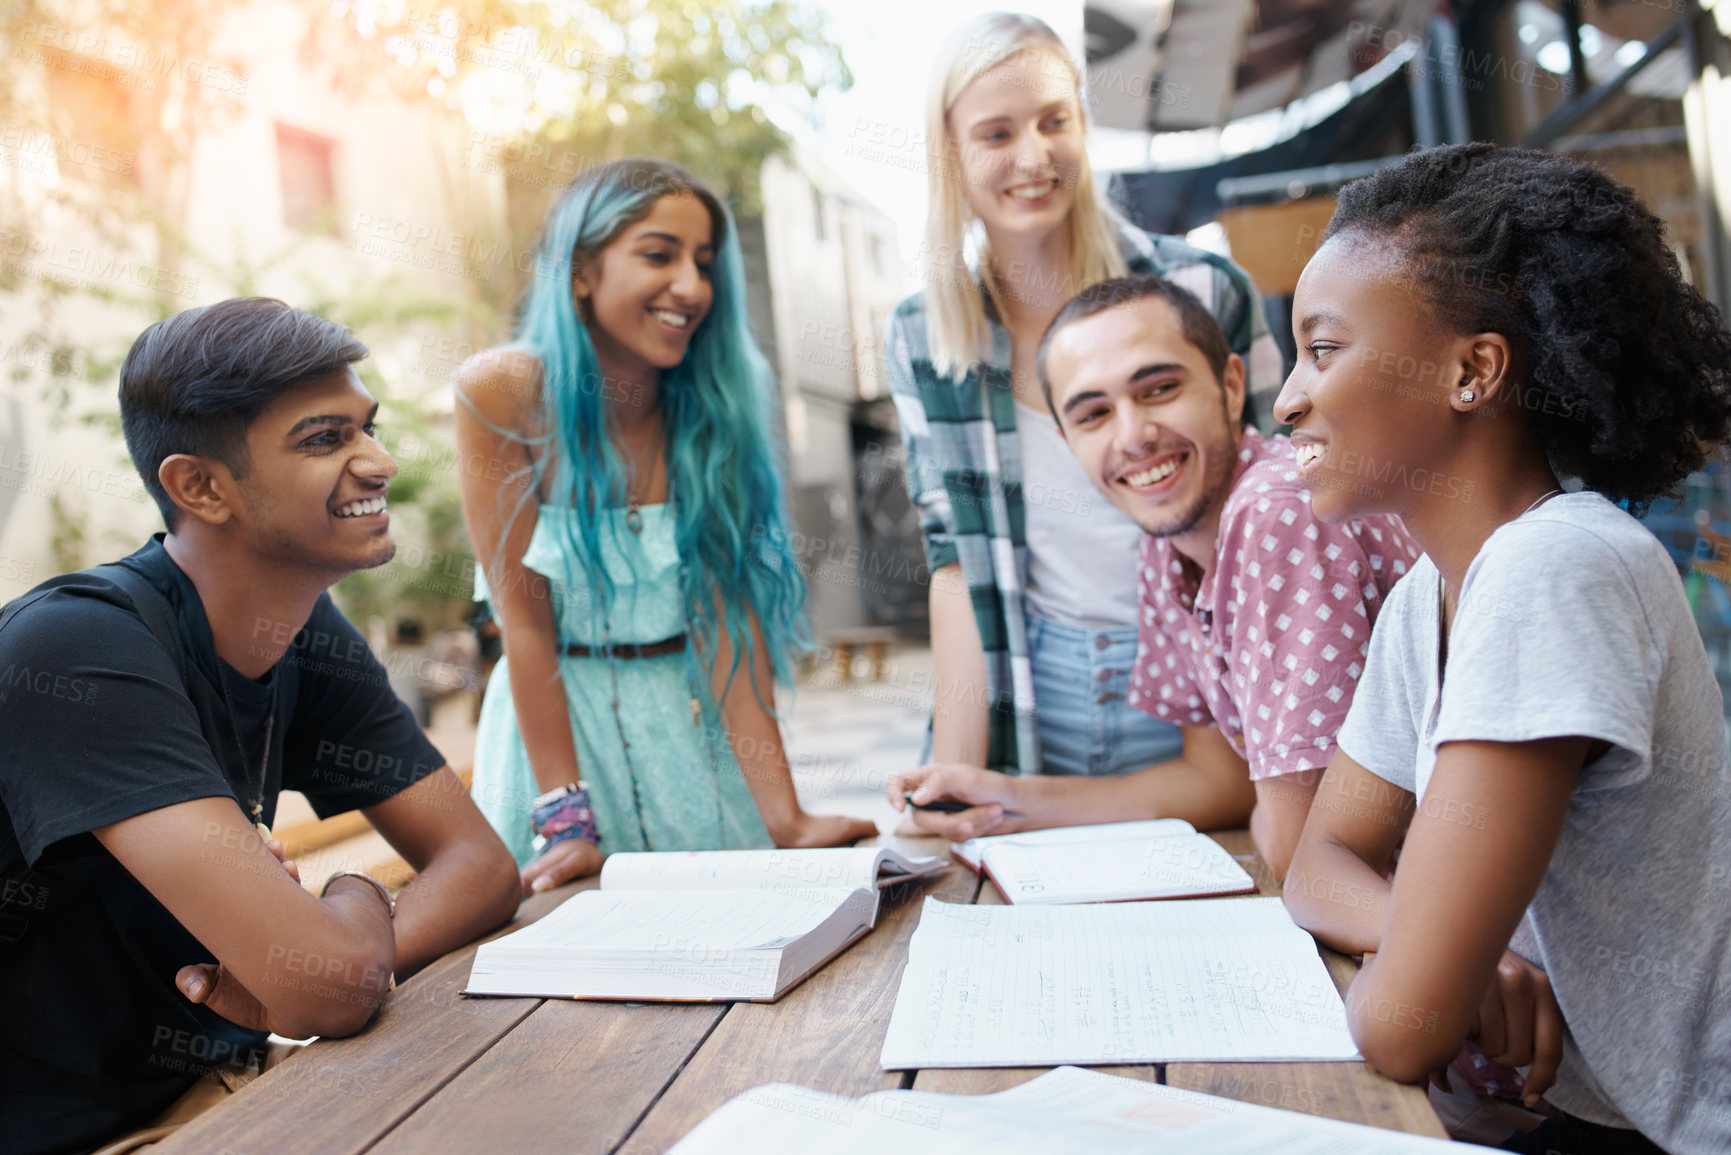 Buy stock photo Shot of a group of young students enjoying a break outdoors on campus